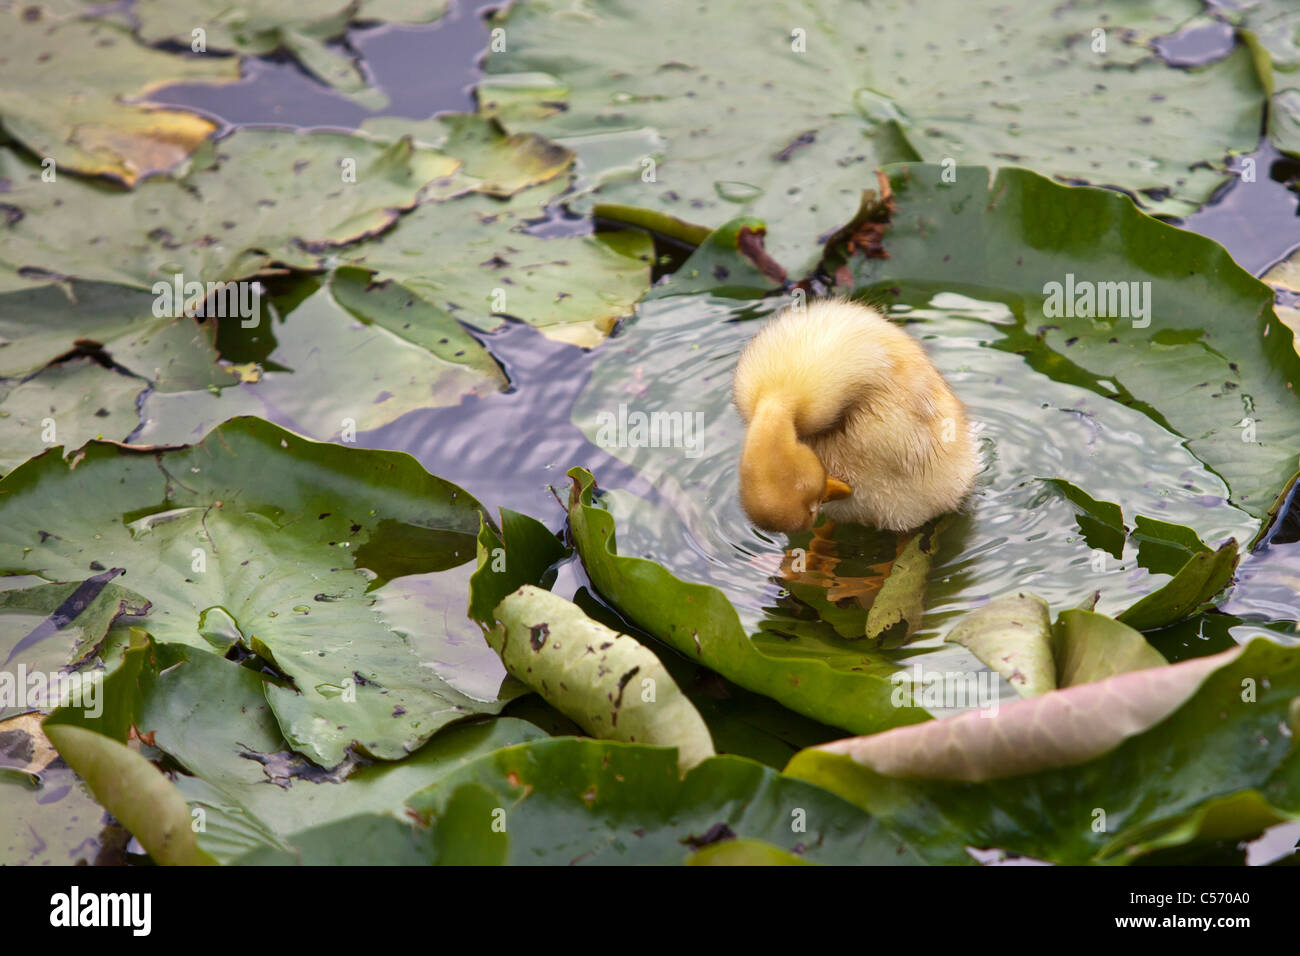 The Netherlands, 's-Graveland, Young duck, duckling in pond. Stock Photo